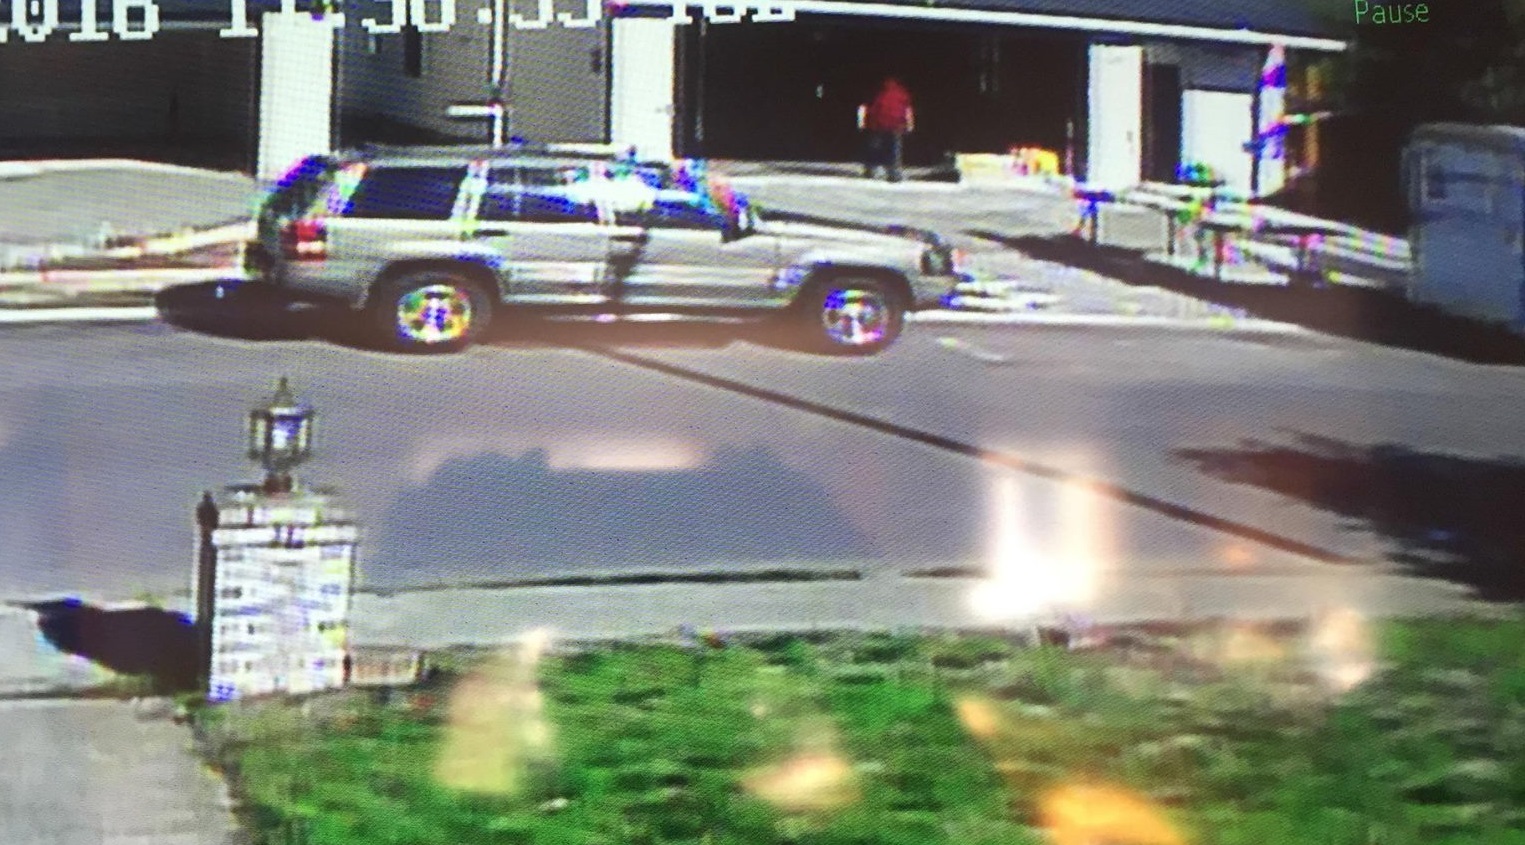 The Clark County Sheriff's Office is looking the driver of this SUV, shown here in an image taken from surveillance video. The man is a suspect in an Oct. 11 theft of tools from a construction site.